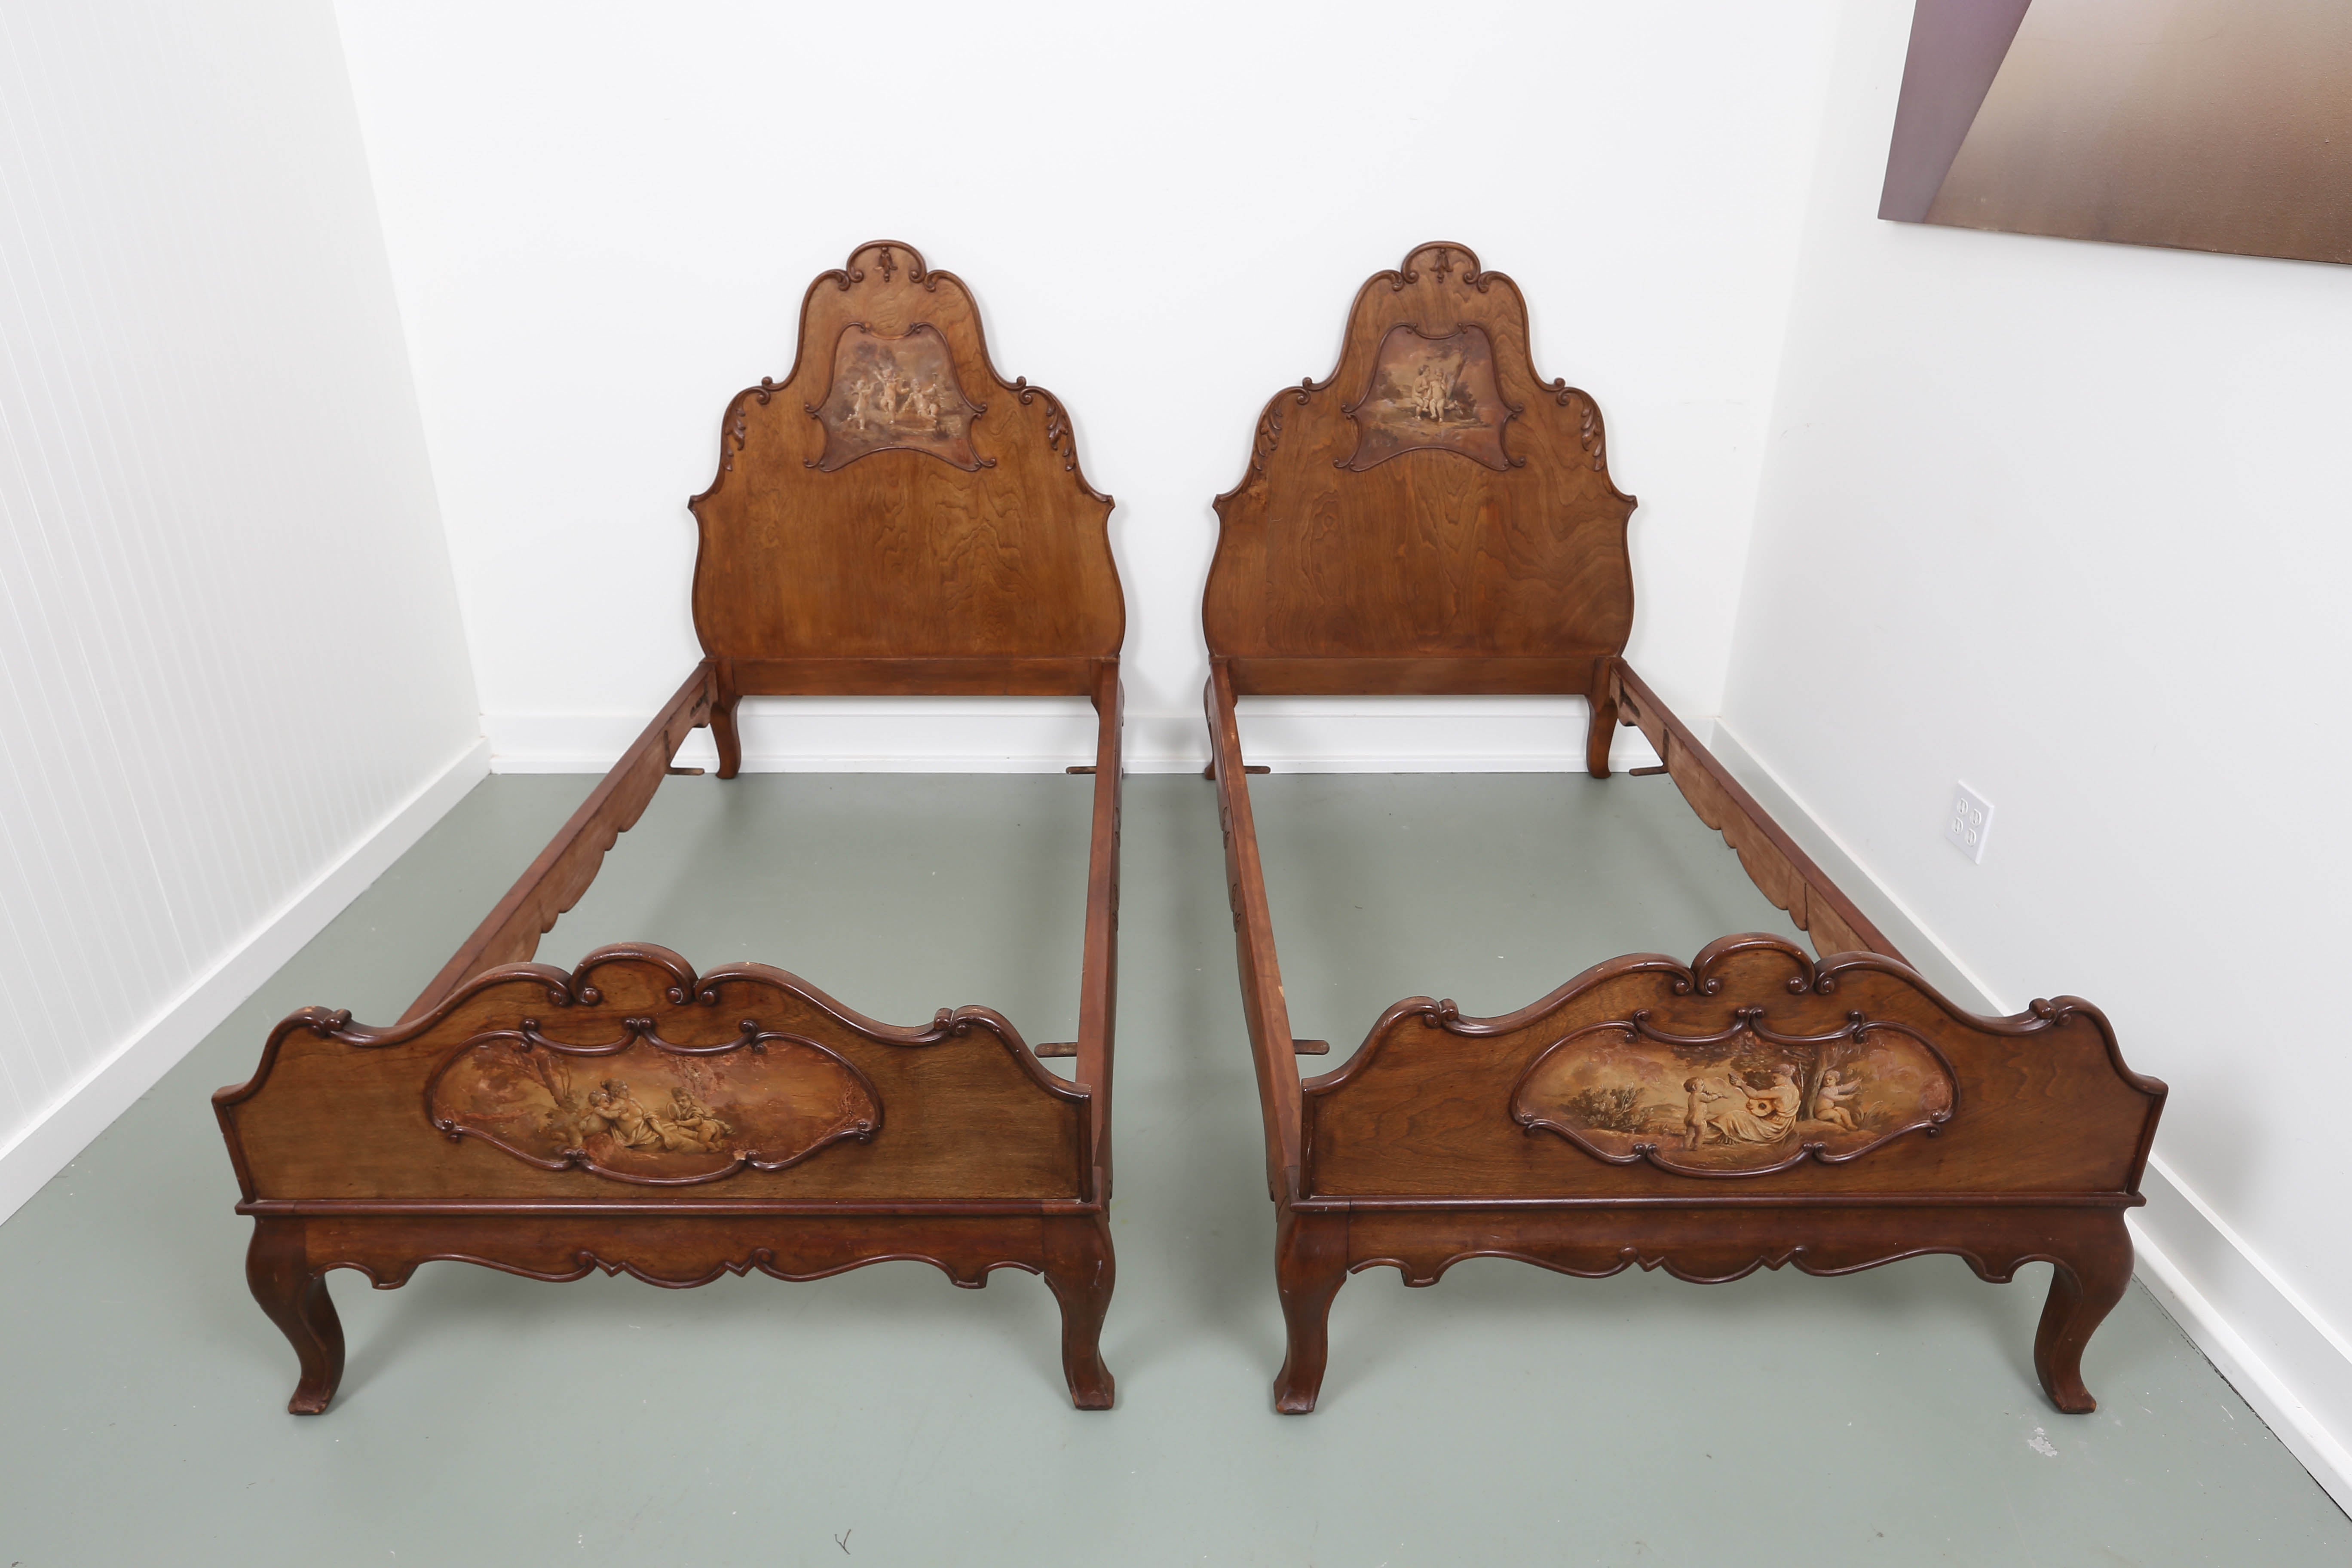 Pair of French Walnut Twin Beds with Cherub Paintings